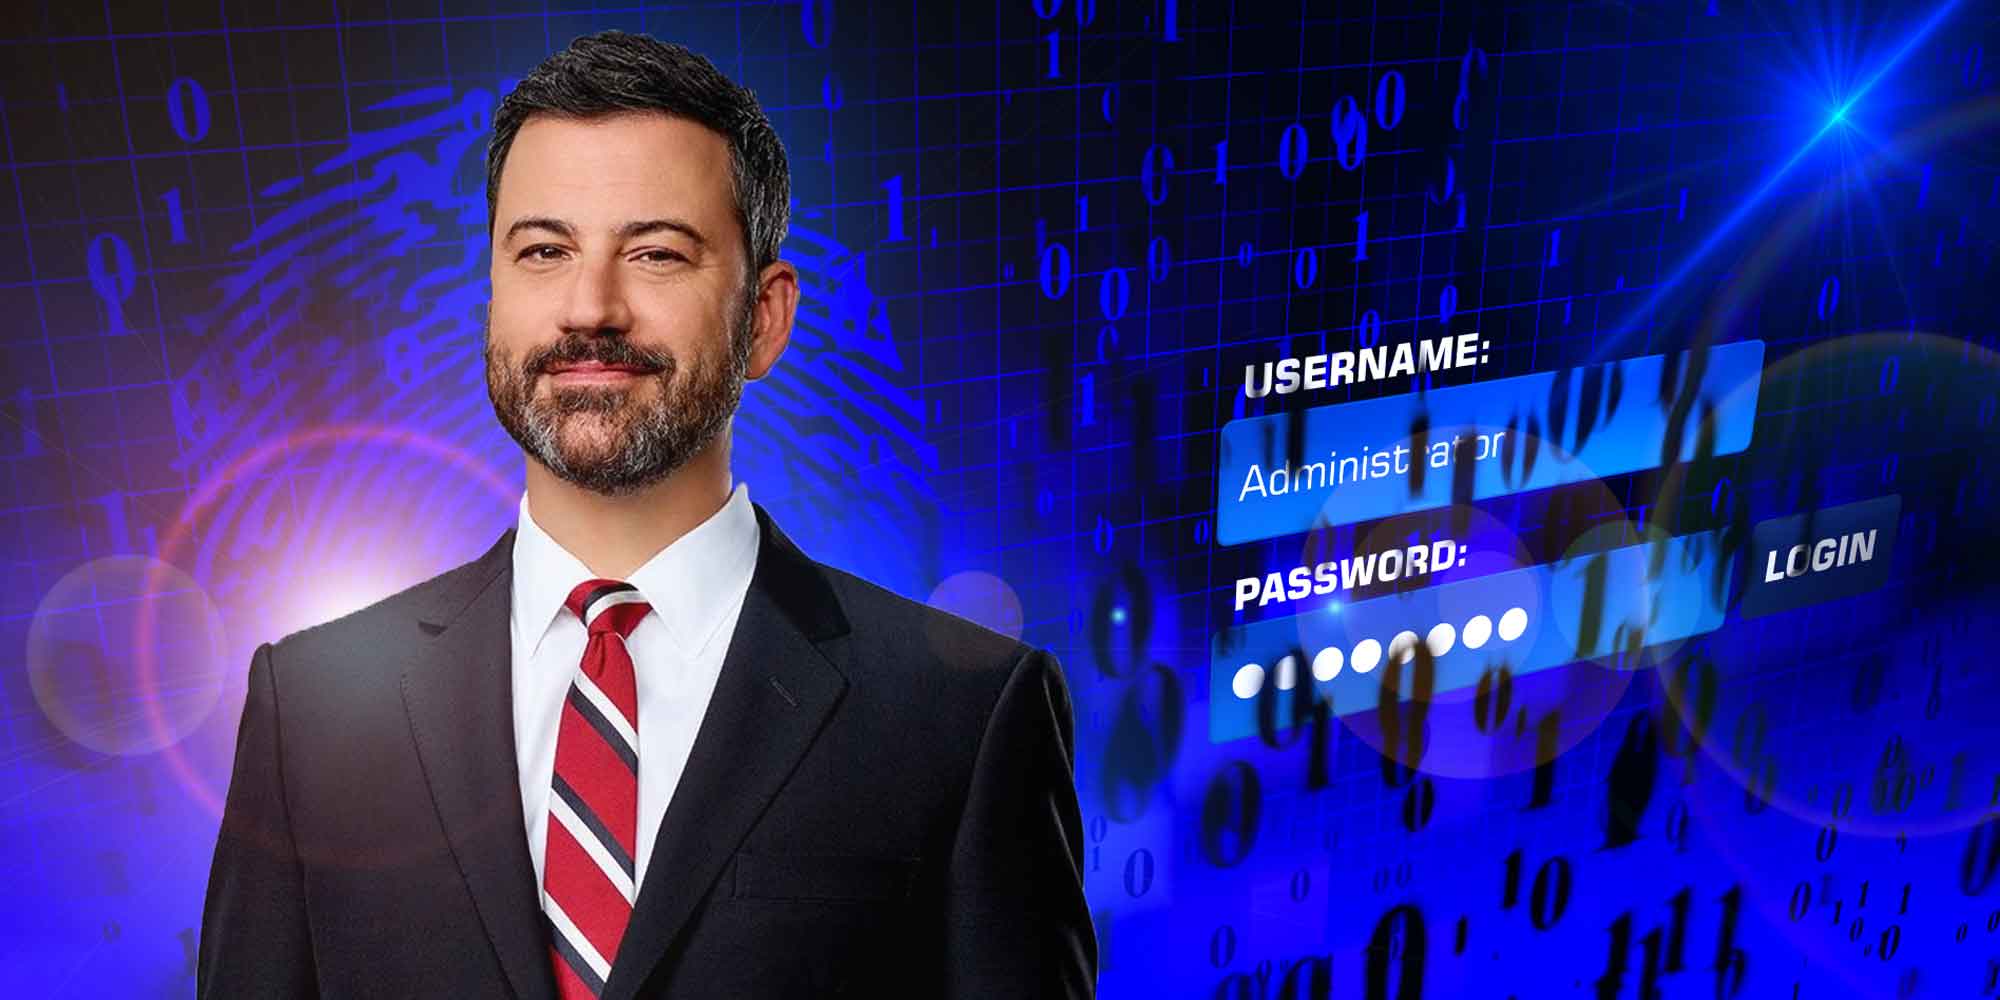 Jimmy Kimmel Demonstrates How Easy It Is To Social Engineer Passwords